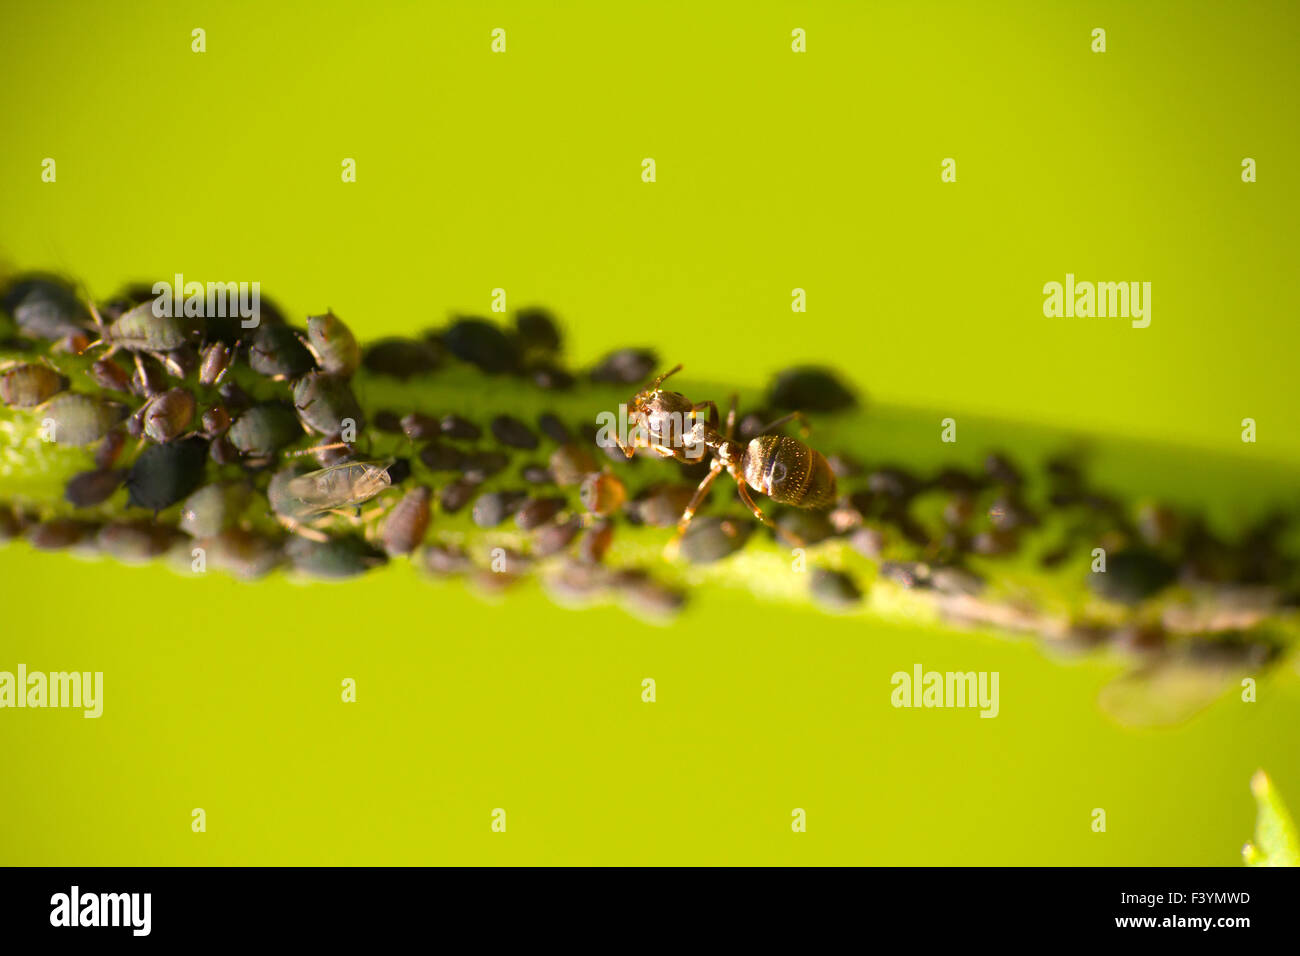 insects  aphis pest and ant Stock Photo